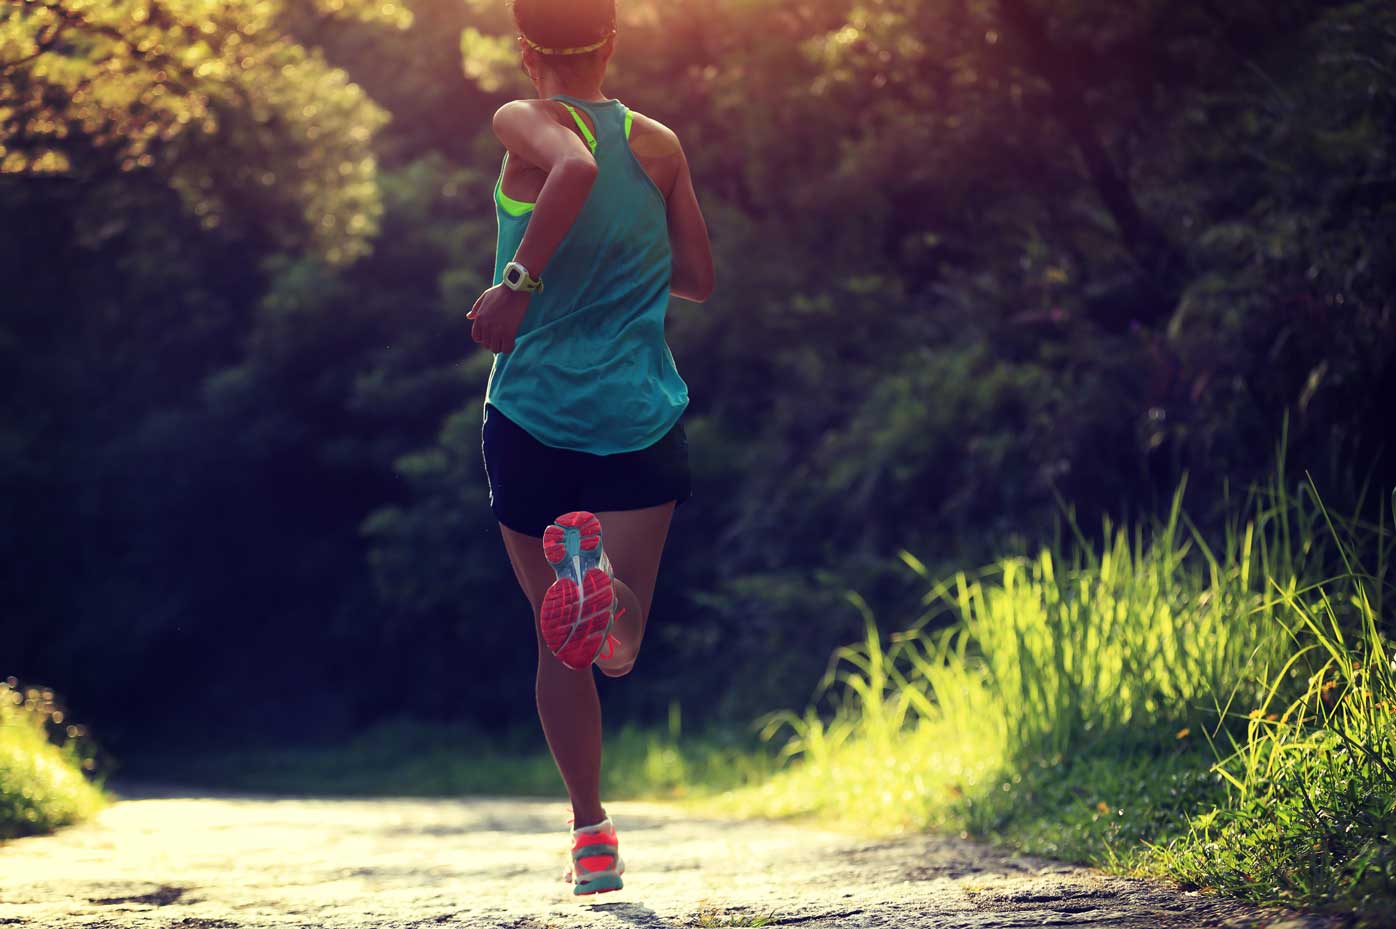 A female runner in profile exercises in a wooded park